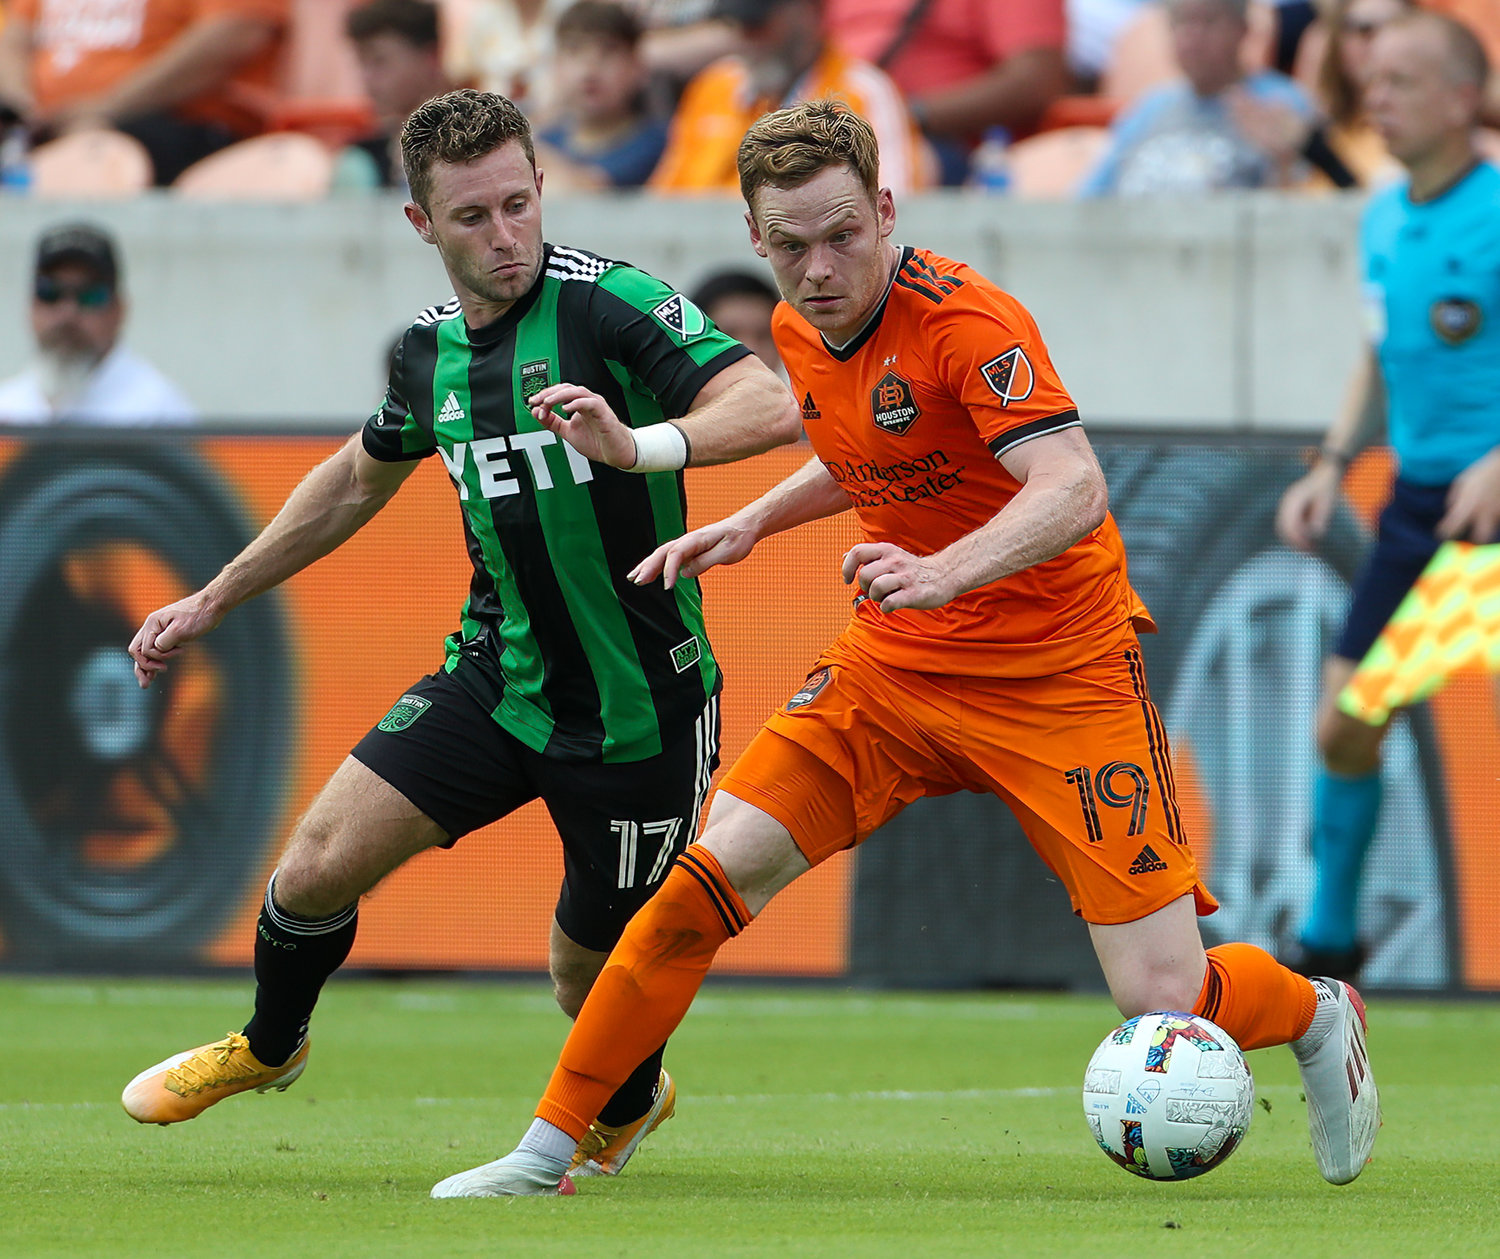 Houston Dynamo forward Tyler Pasher (19) works against Austin FC forward Jon Gallagher (17) during the first half of a Major League Soccer match between the Houston Dynamo and Austin FC on April 30, 2022 in Houston, Texas.